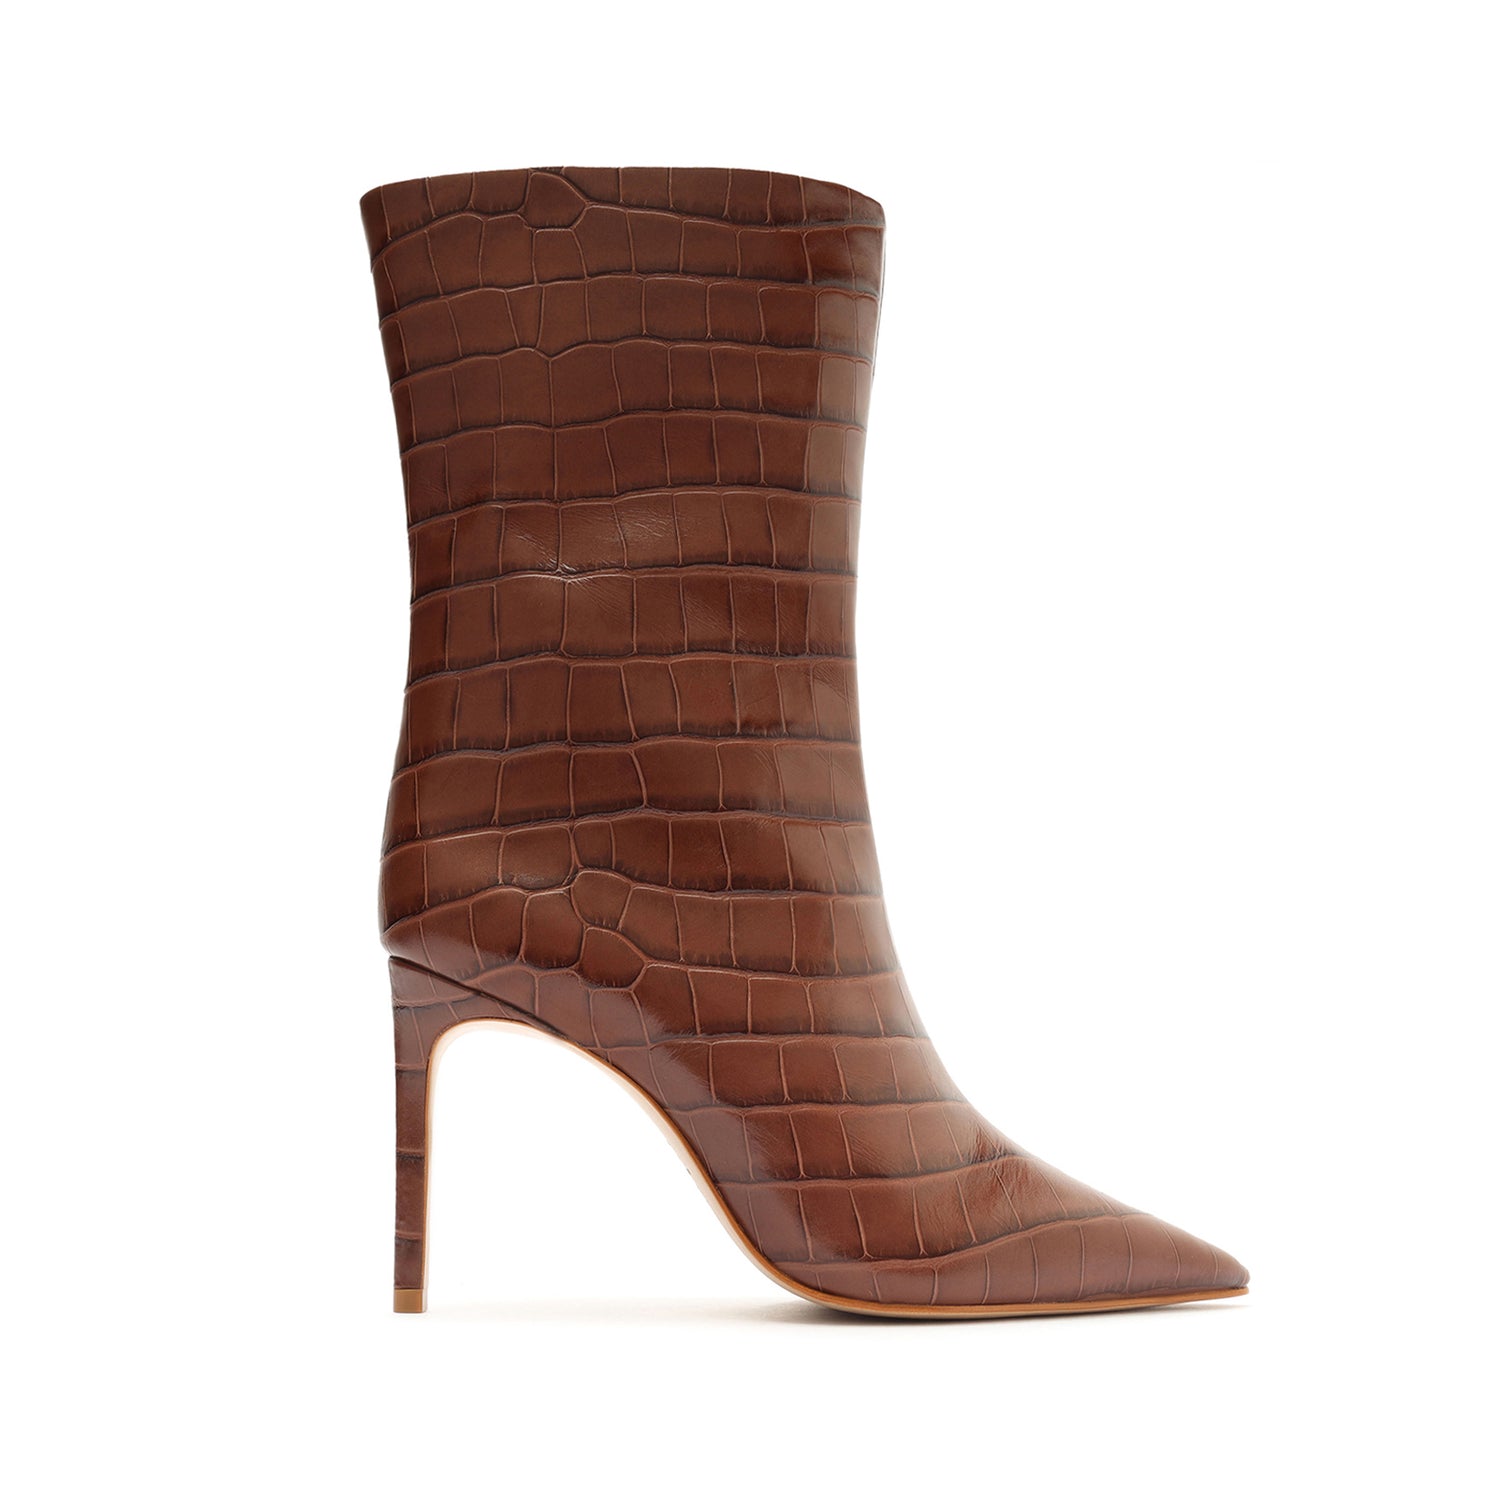 Mary Crocodile Embossed Leather Bootie Booties Pre Fall 22 5 New Cognac Crocodile Embossed Leather - Schutz Shoes